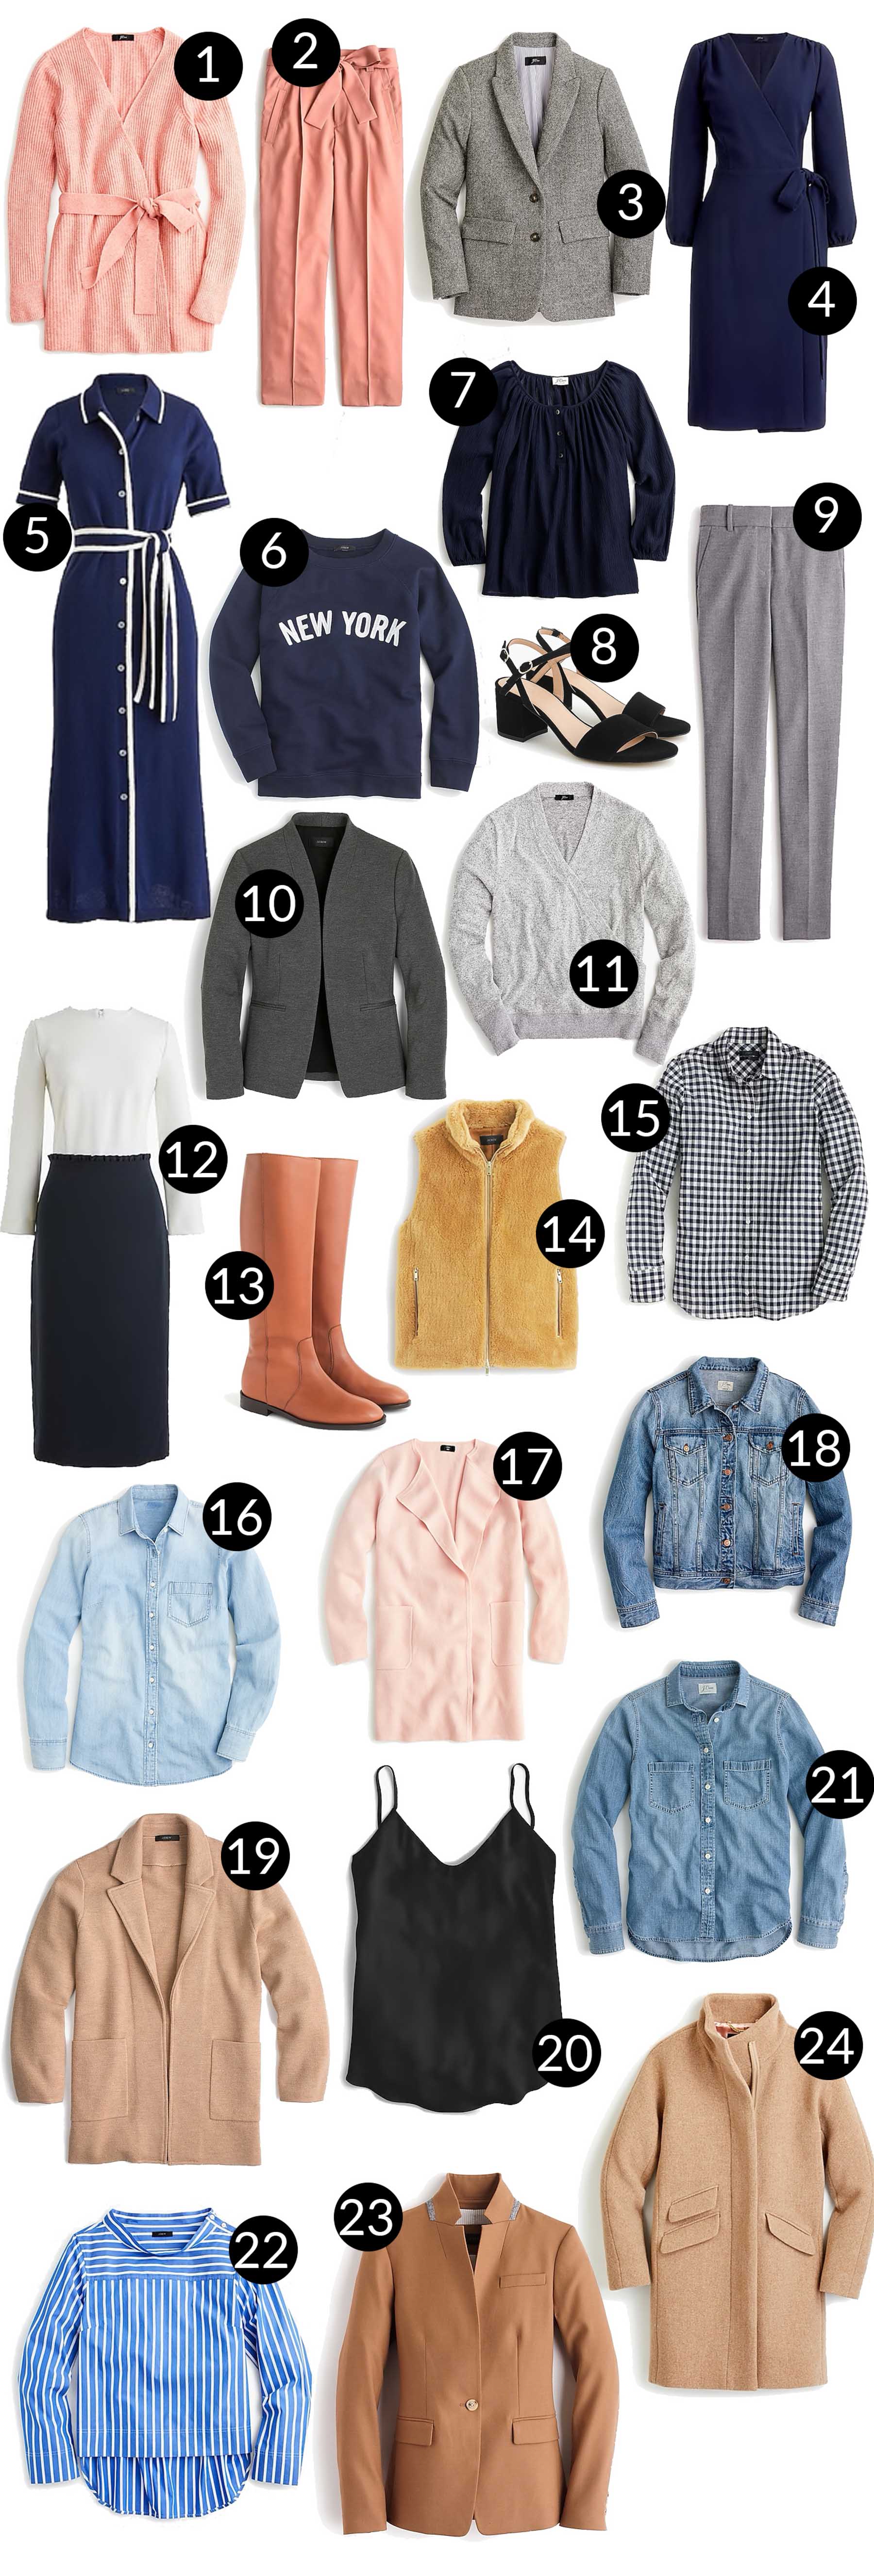 J.Crew Labor Day Weekend Sales - Kelly in the City